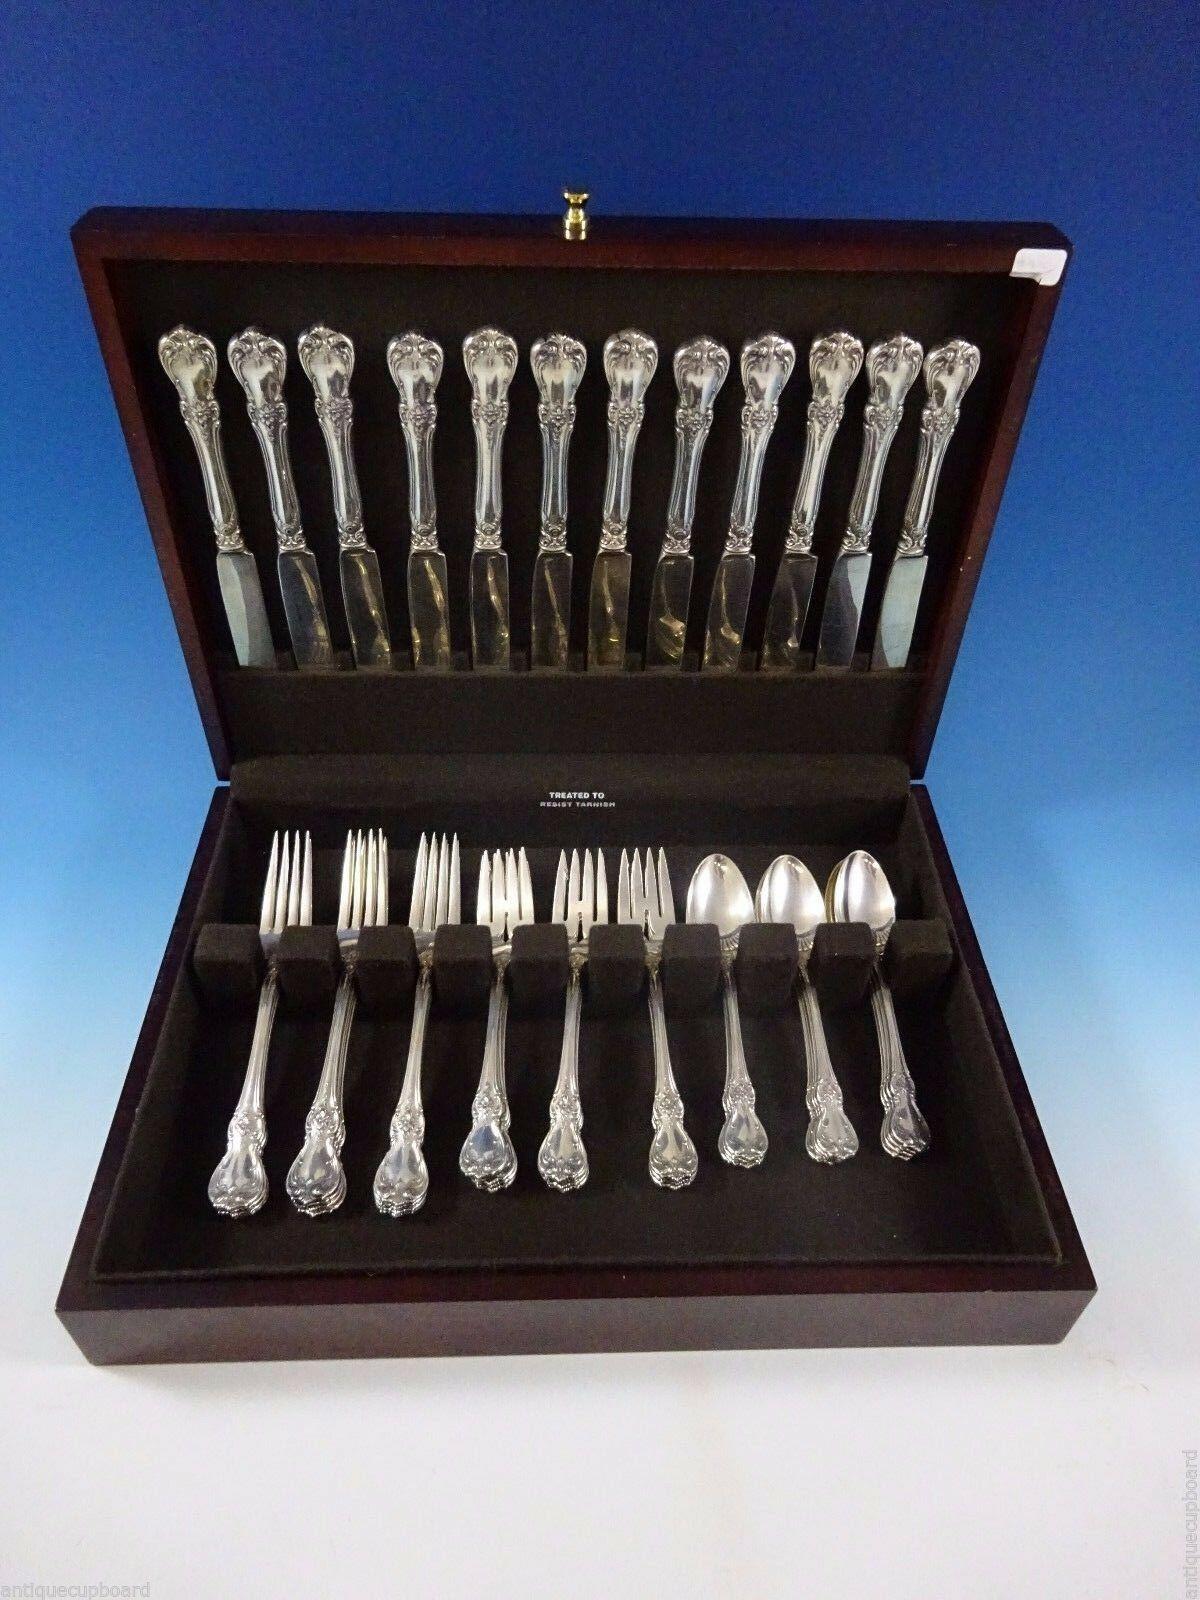 Old Master by Towle sterling silver flatware set, 48 pieces. This set includes:

12 knives, 8 3/4